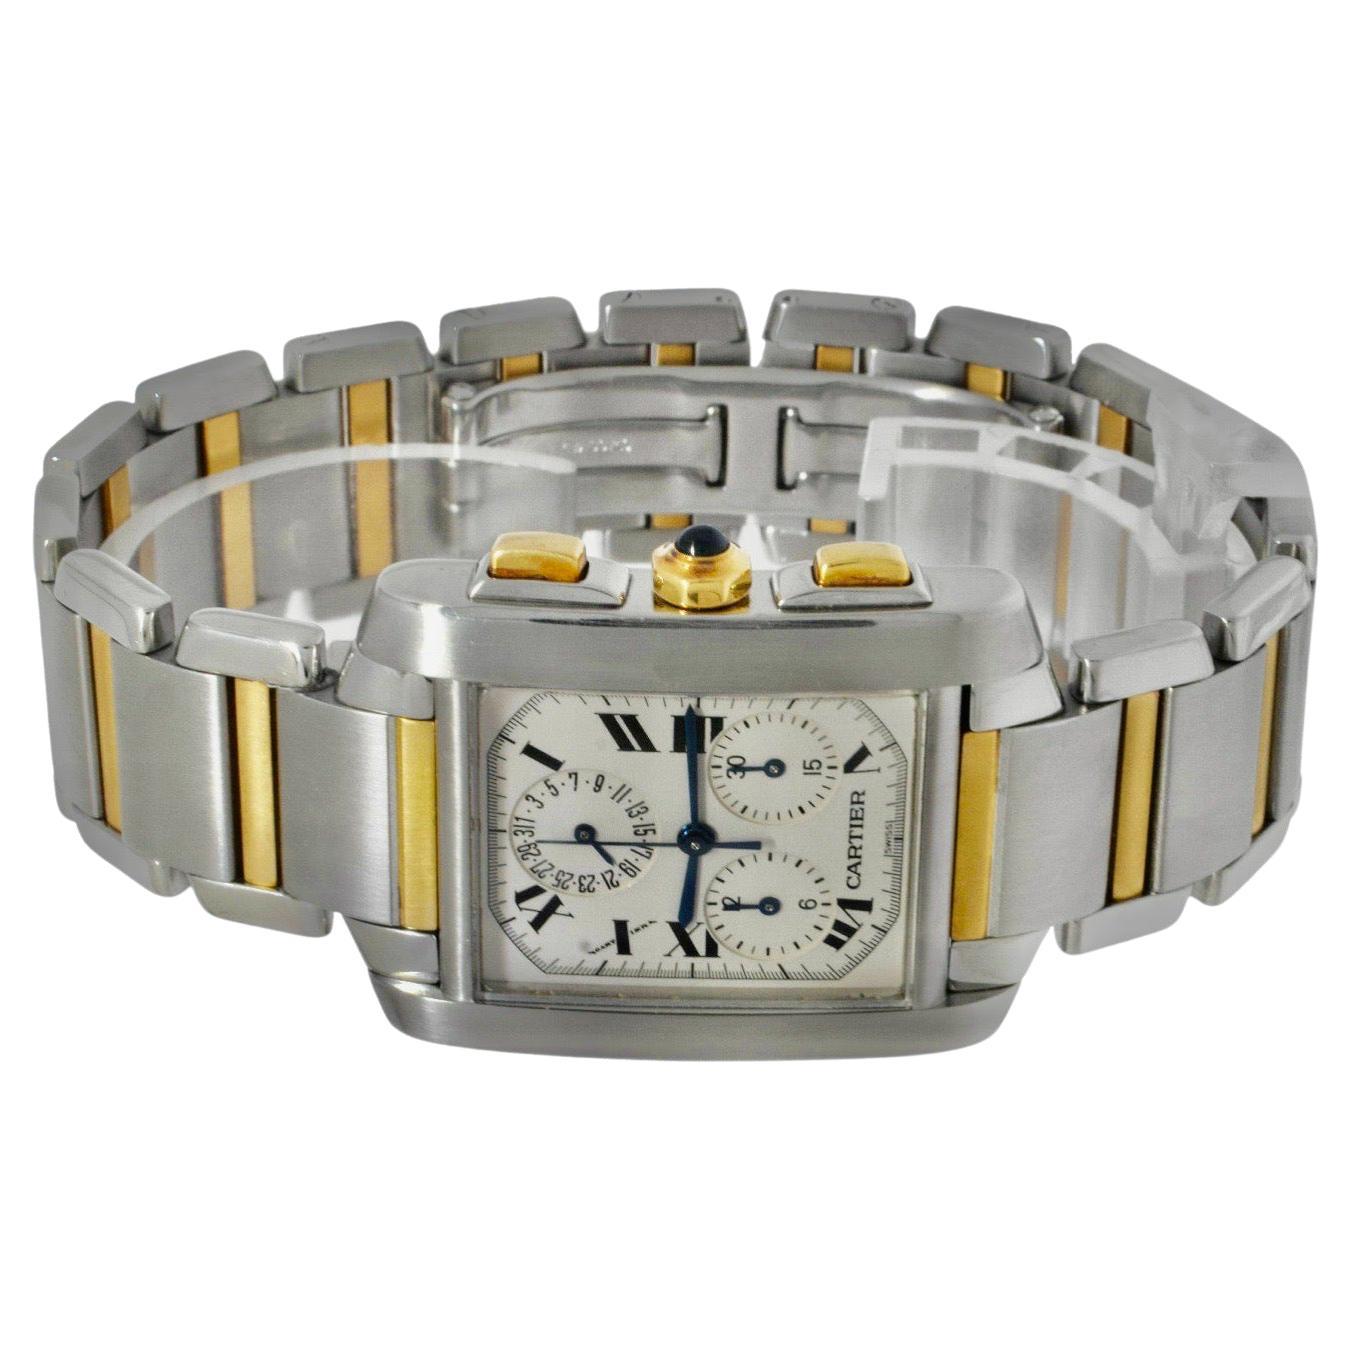 Near mint preowned mens/Unisex Cartier Tank Francaise Chronoflex in stainless steel and gold inner links pushers and crown features silver dial with Roman numerals. Unique perpetual date display with chronograph movement.
Brand: Cartier
Model:Tank